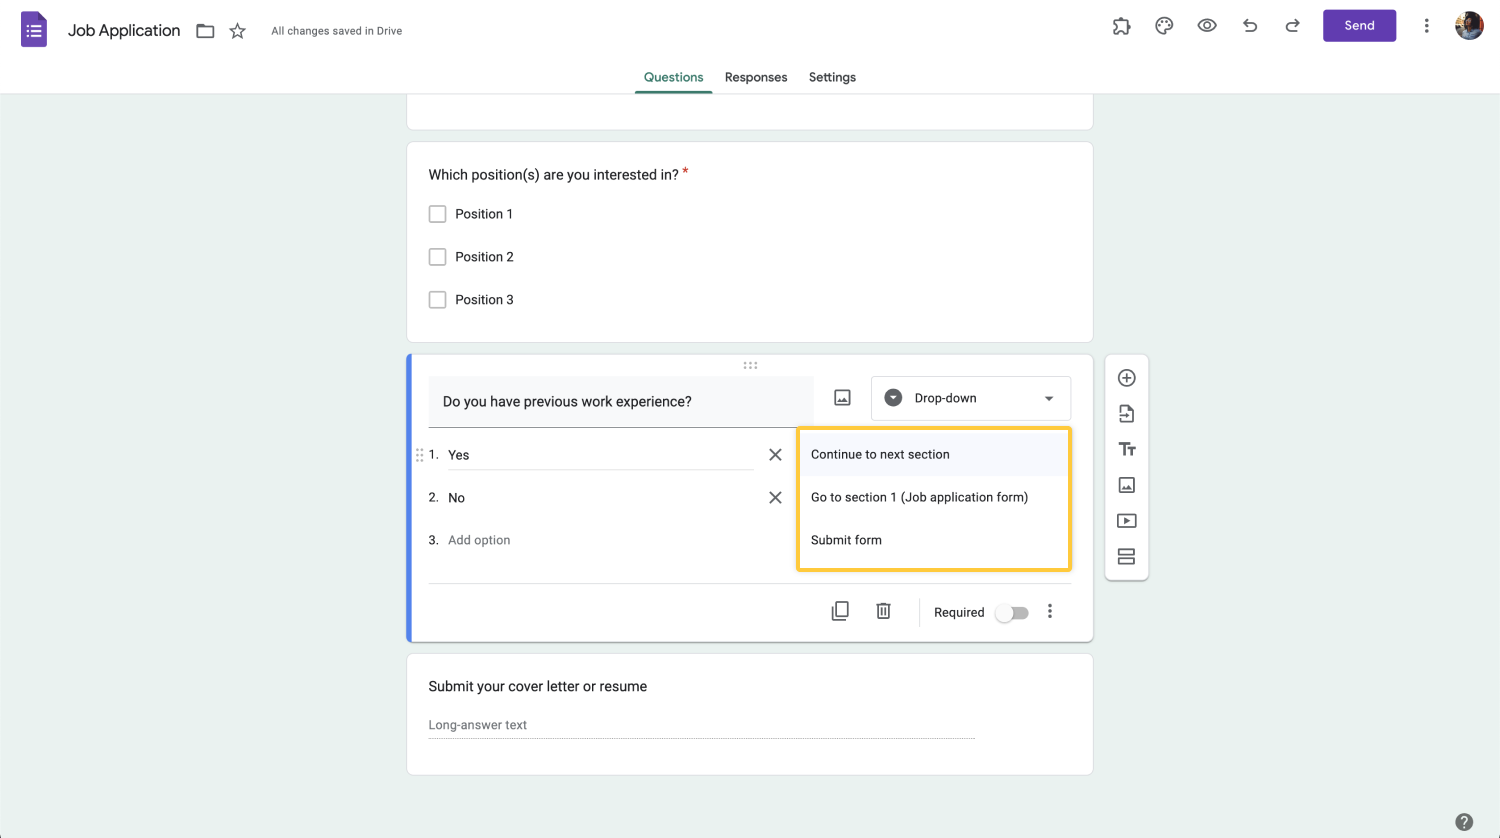 How To Go to a Section Based on a Specific Answer in Google Forms